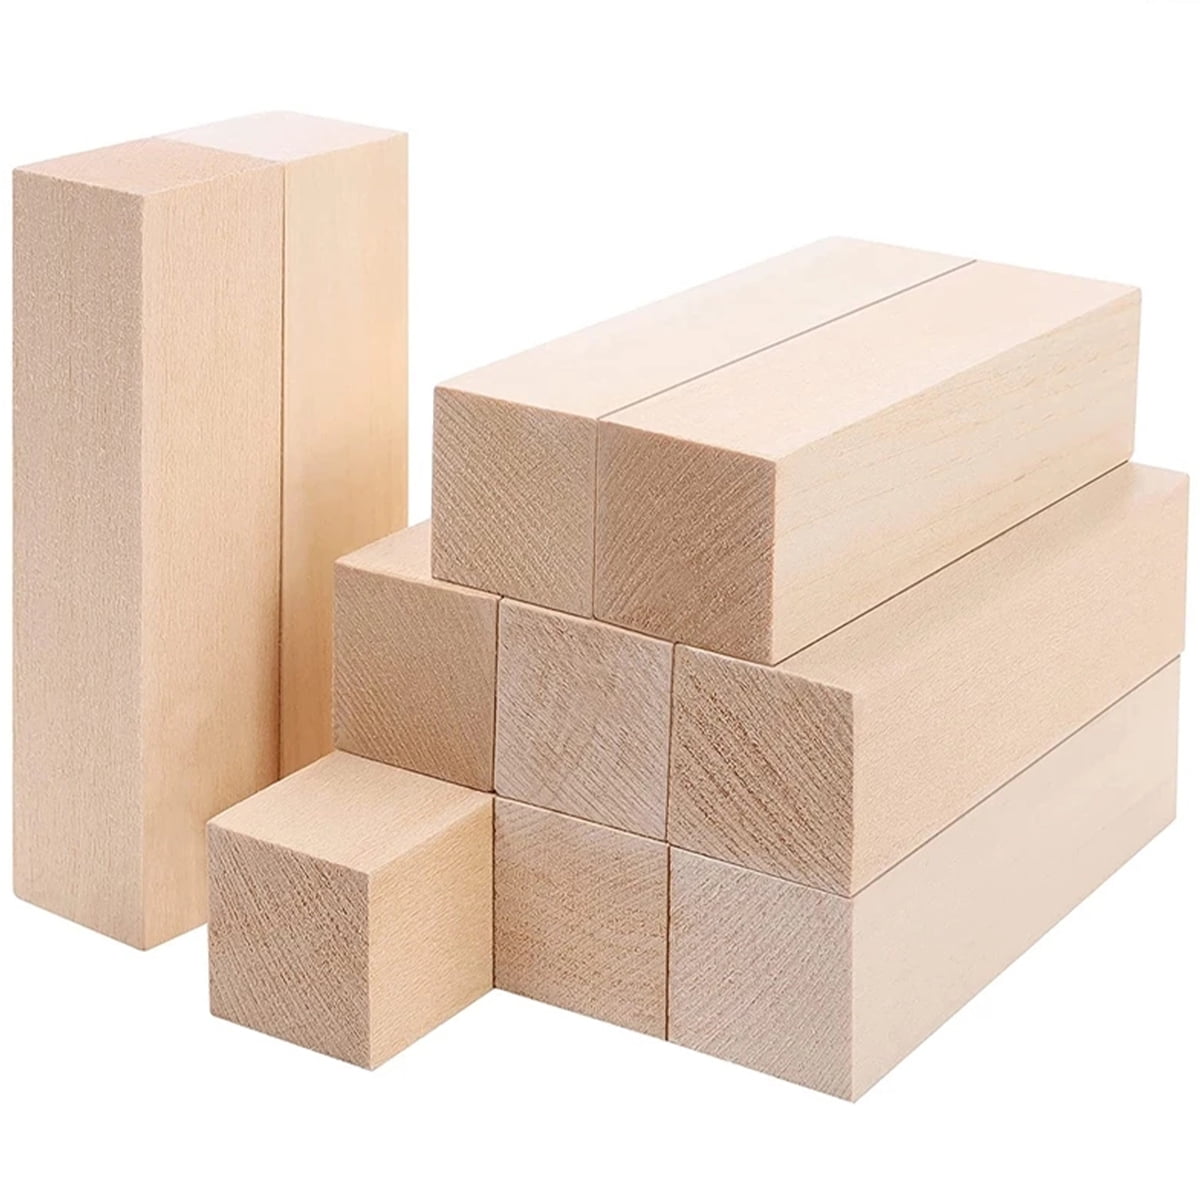 CYEAH 40 PCS Basswood Carving Blocks, 4 Inch Wood Blocks for Carving,  Basswood f